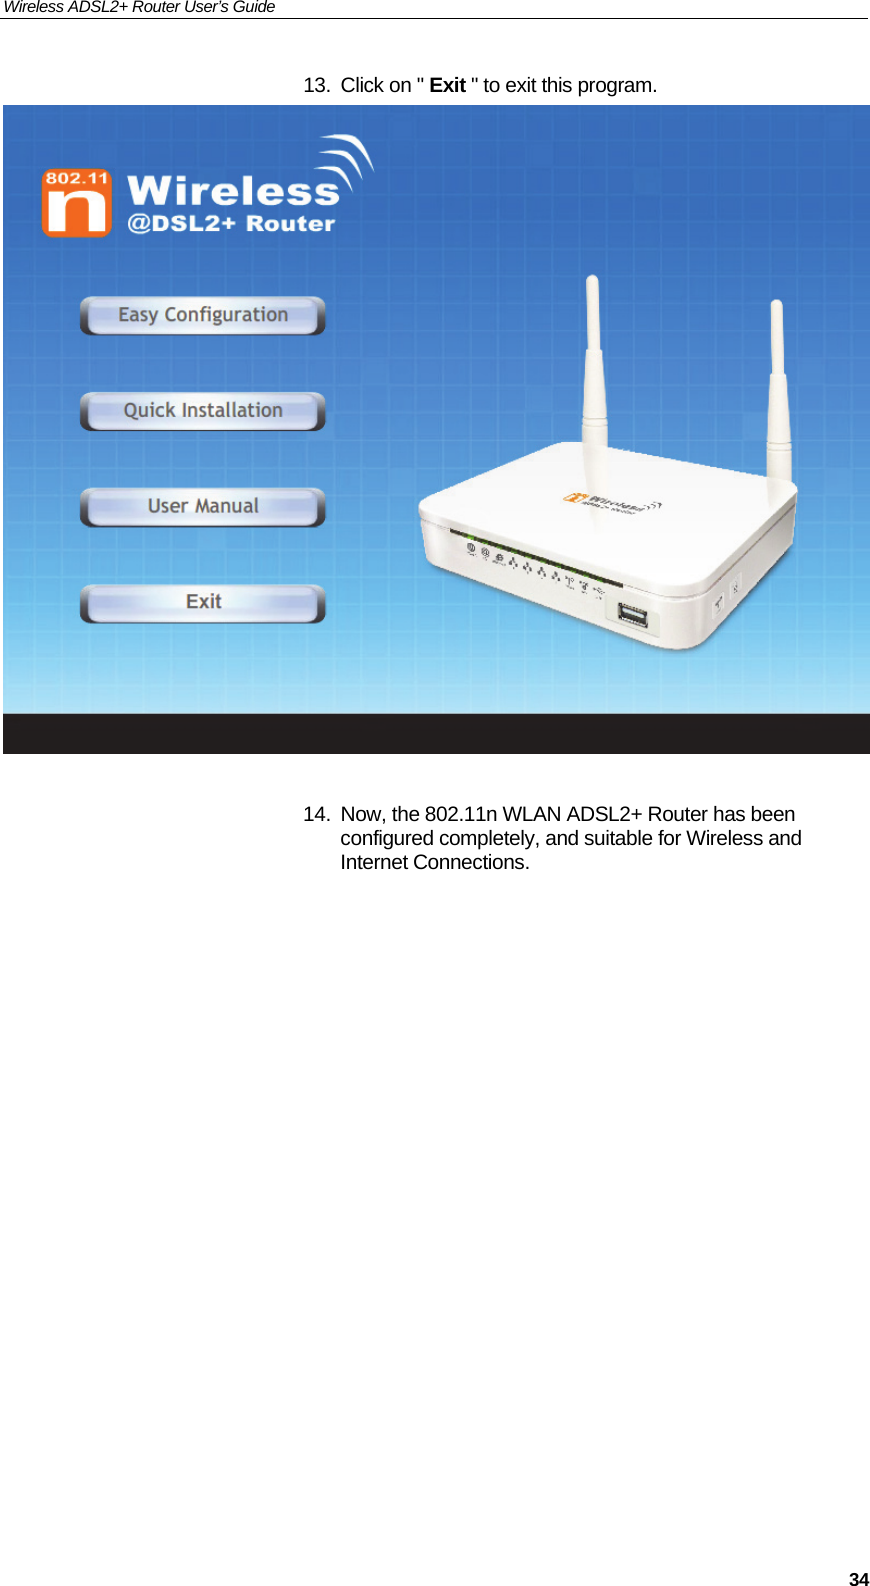 Wireless ADSL2+ Router User’s Guide     3413.  Click on &quot; Exit &quot; to exit this program.   14.  Now, the 802.11n WLAN ADSL2+ Router has been configured completely, and suitable for Wireless and Internet Connections.                